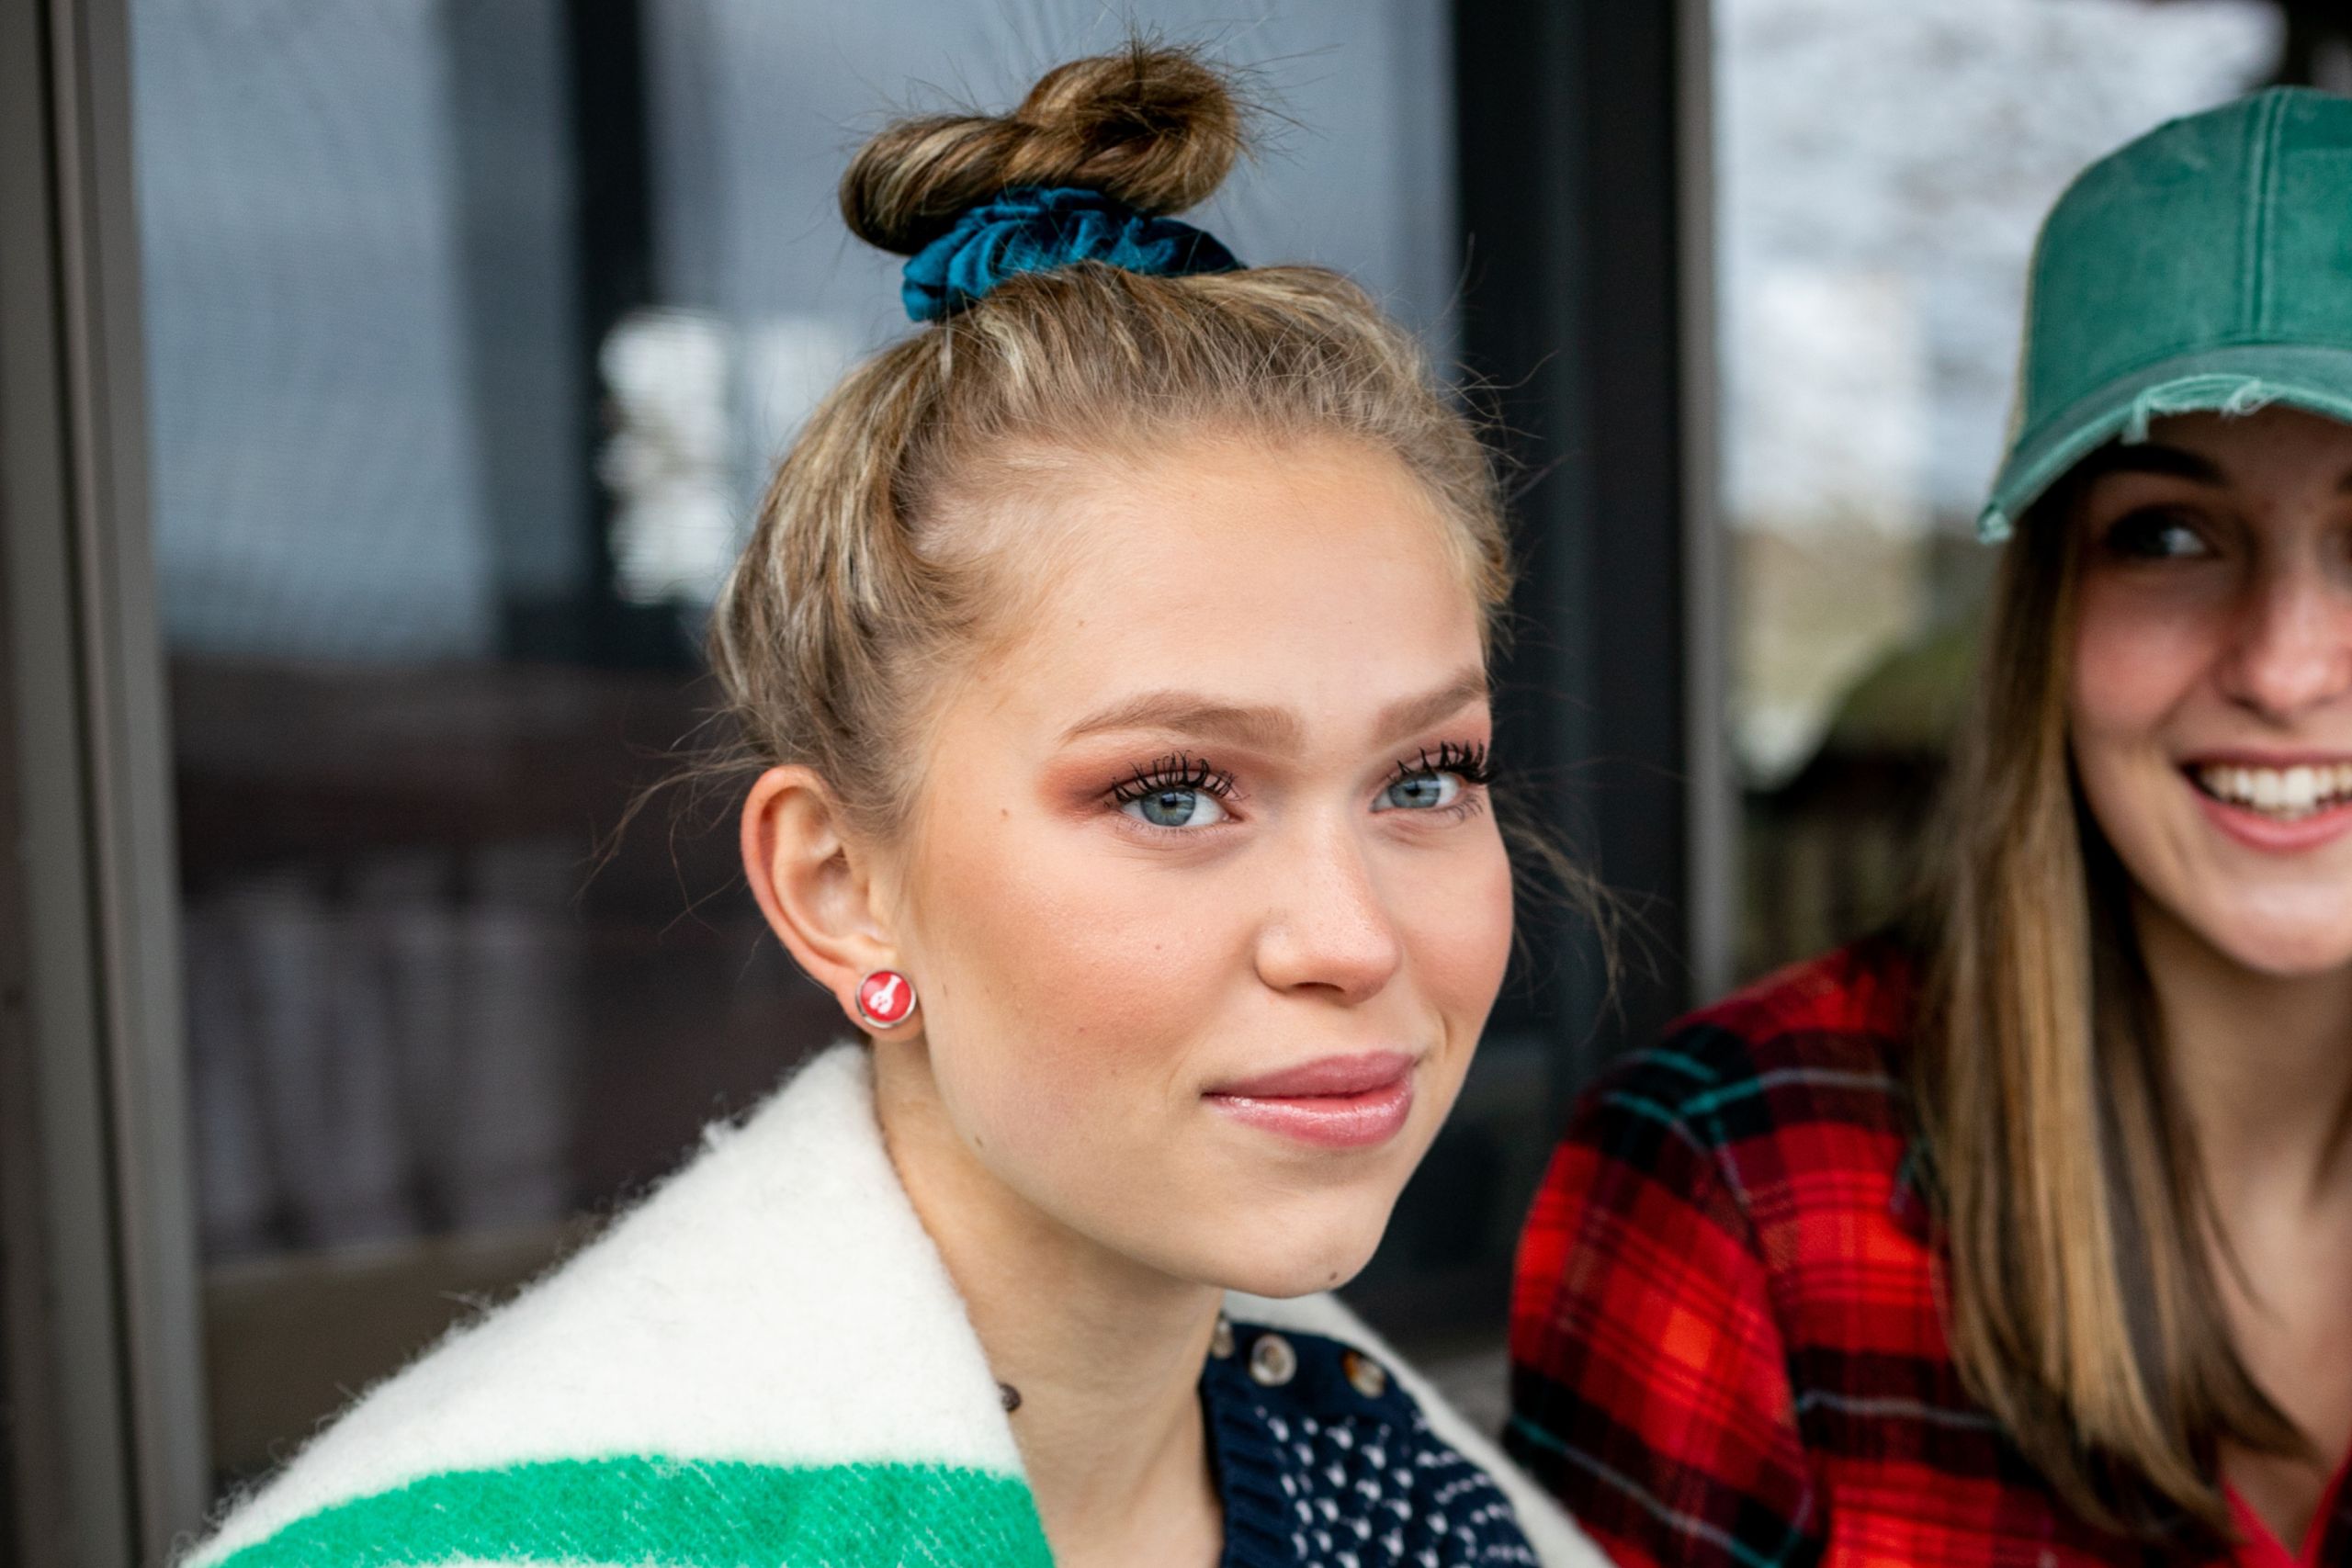 Headshot of a girl showing off Erin flett earings and a blanket